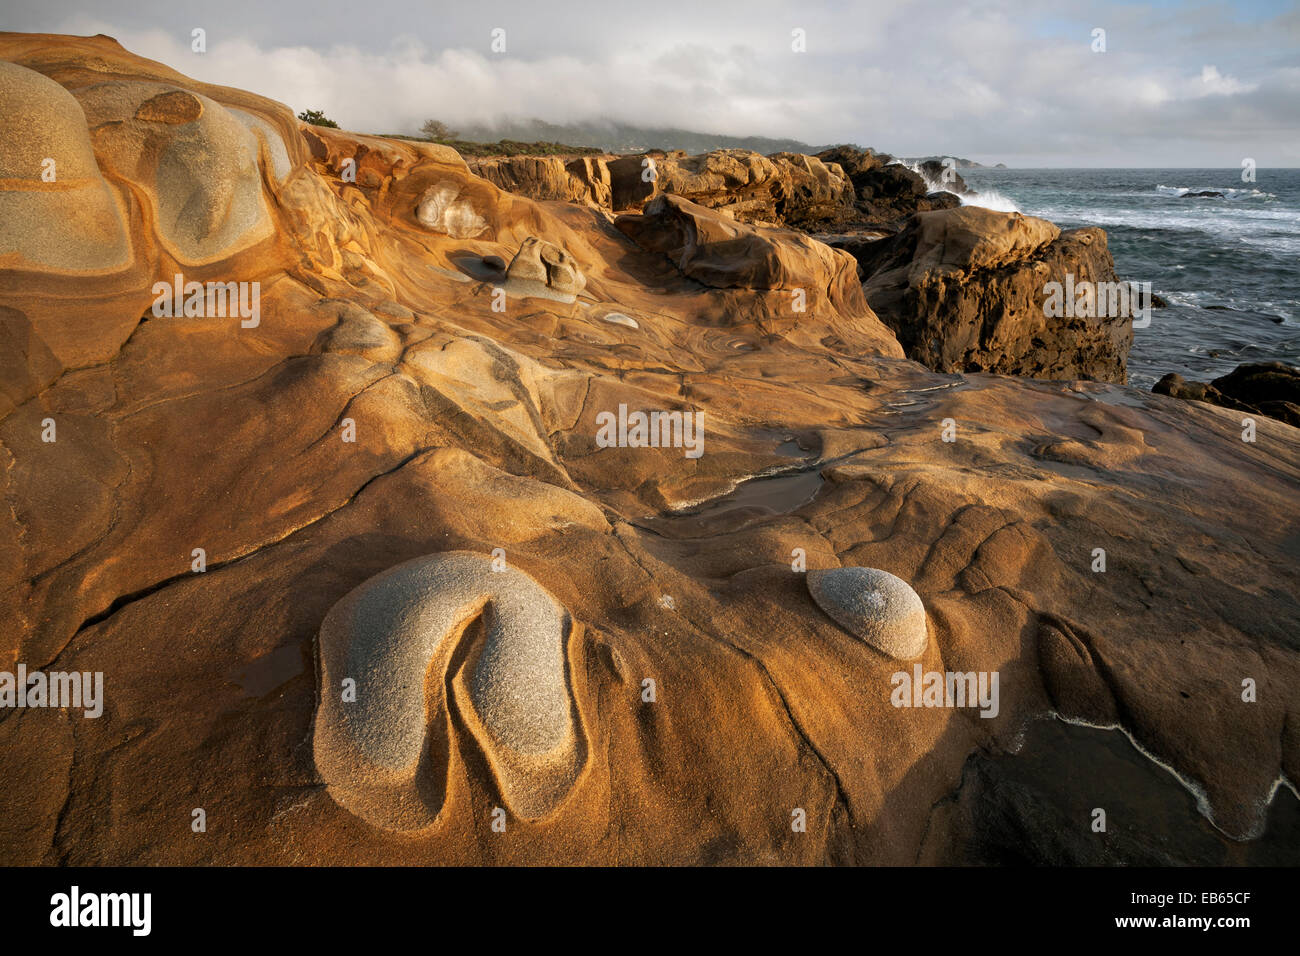 CA02422-00...CALIFORNIA - Colorful sandstone along the the shores of the Pacific Ocean from Point Lobos State Reserve. Stock Photo